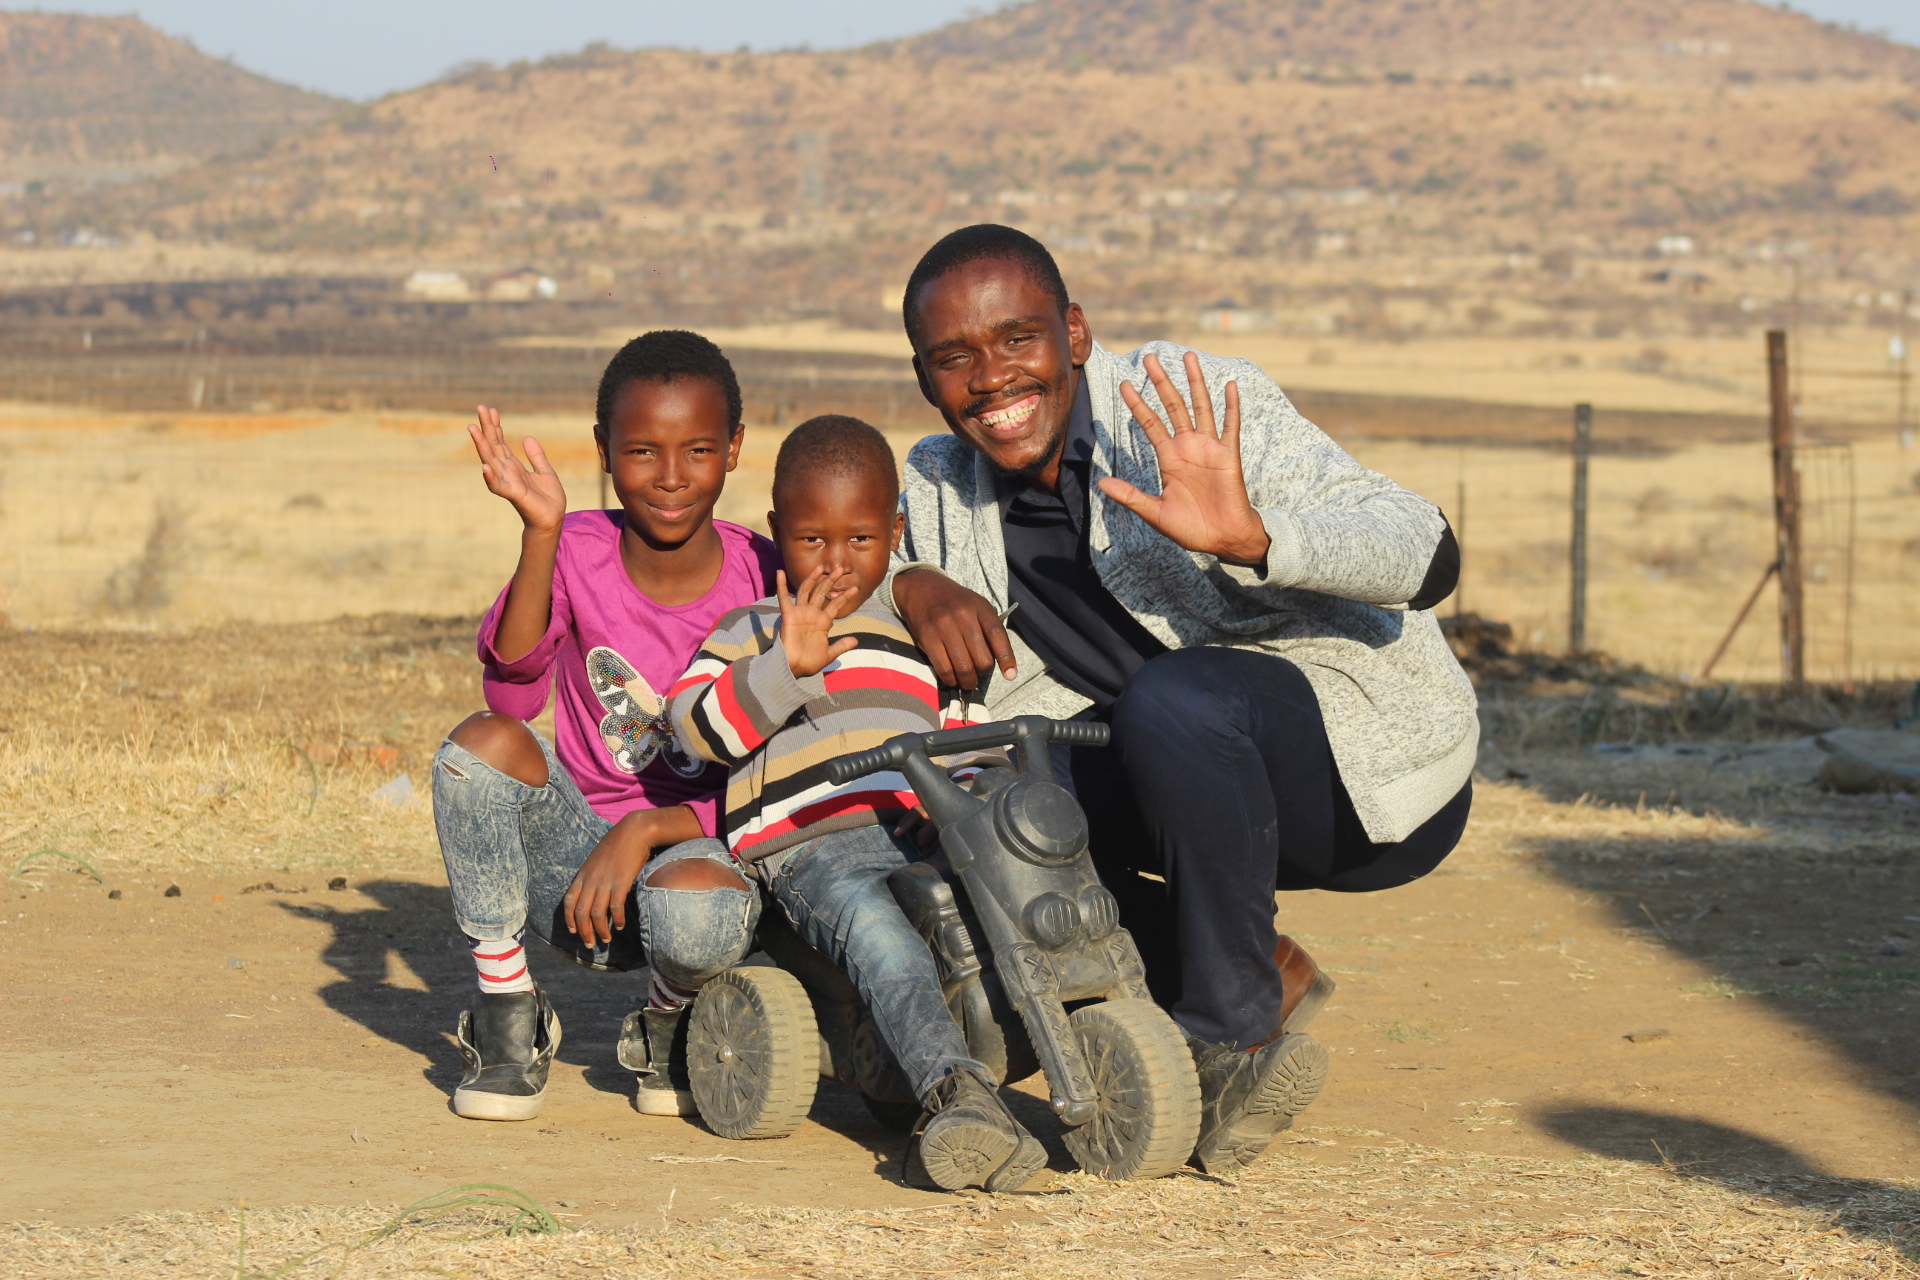 Children, Amahle and Siyanda, with a CERI staff member